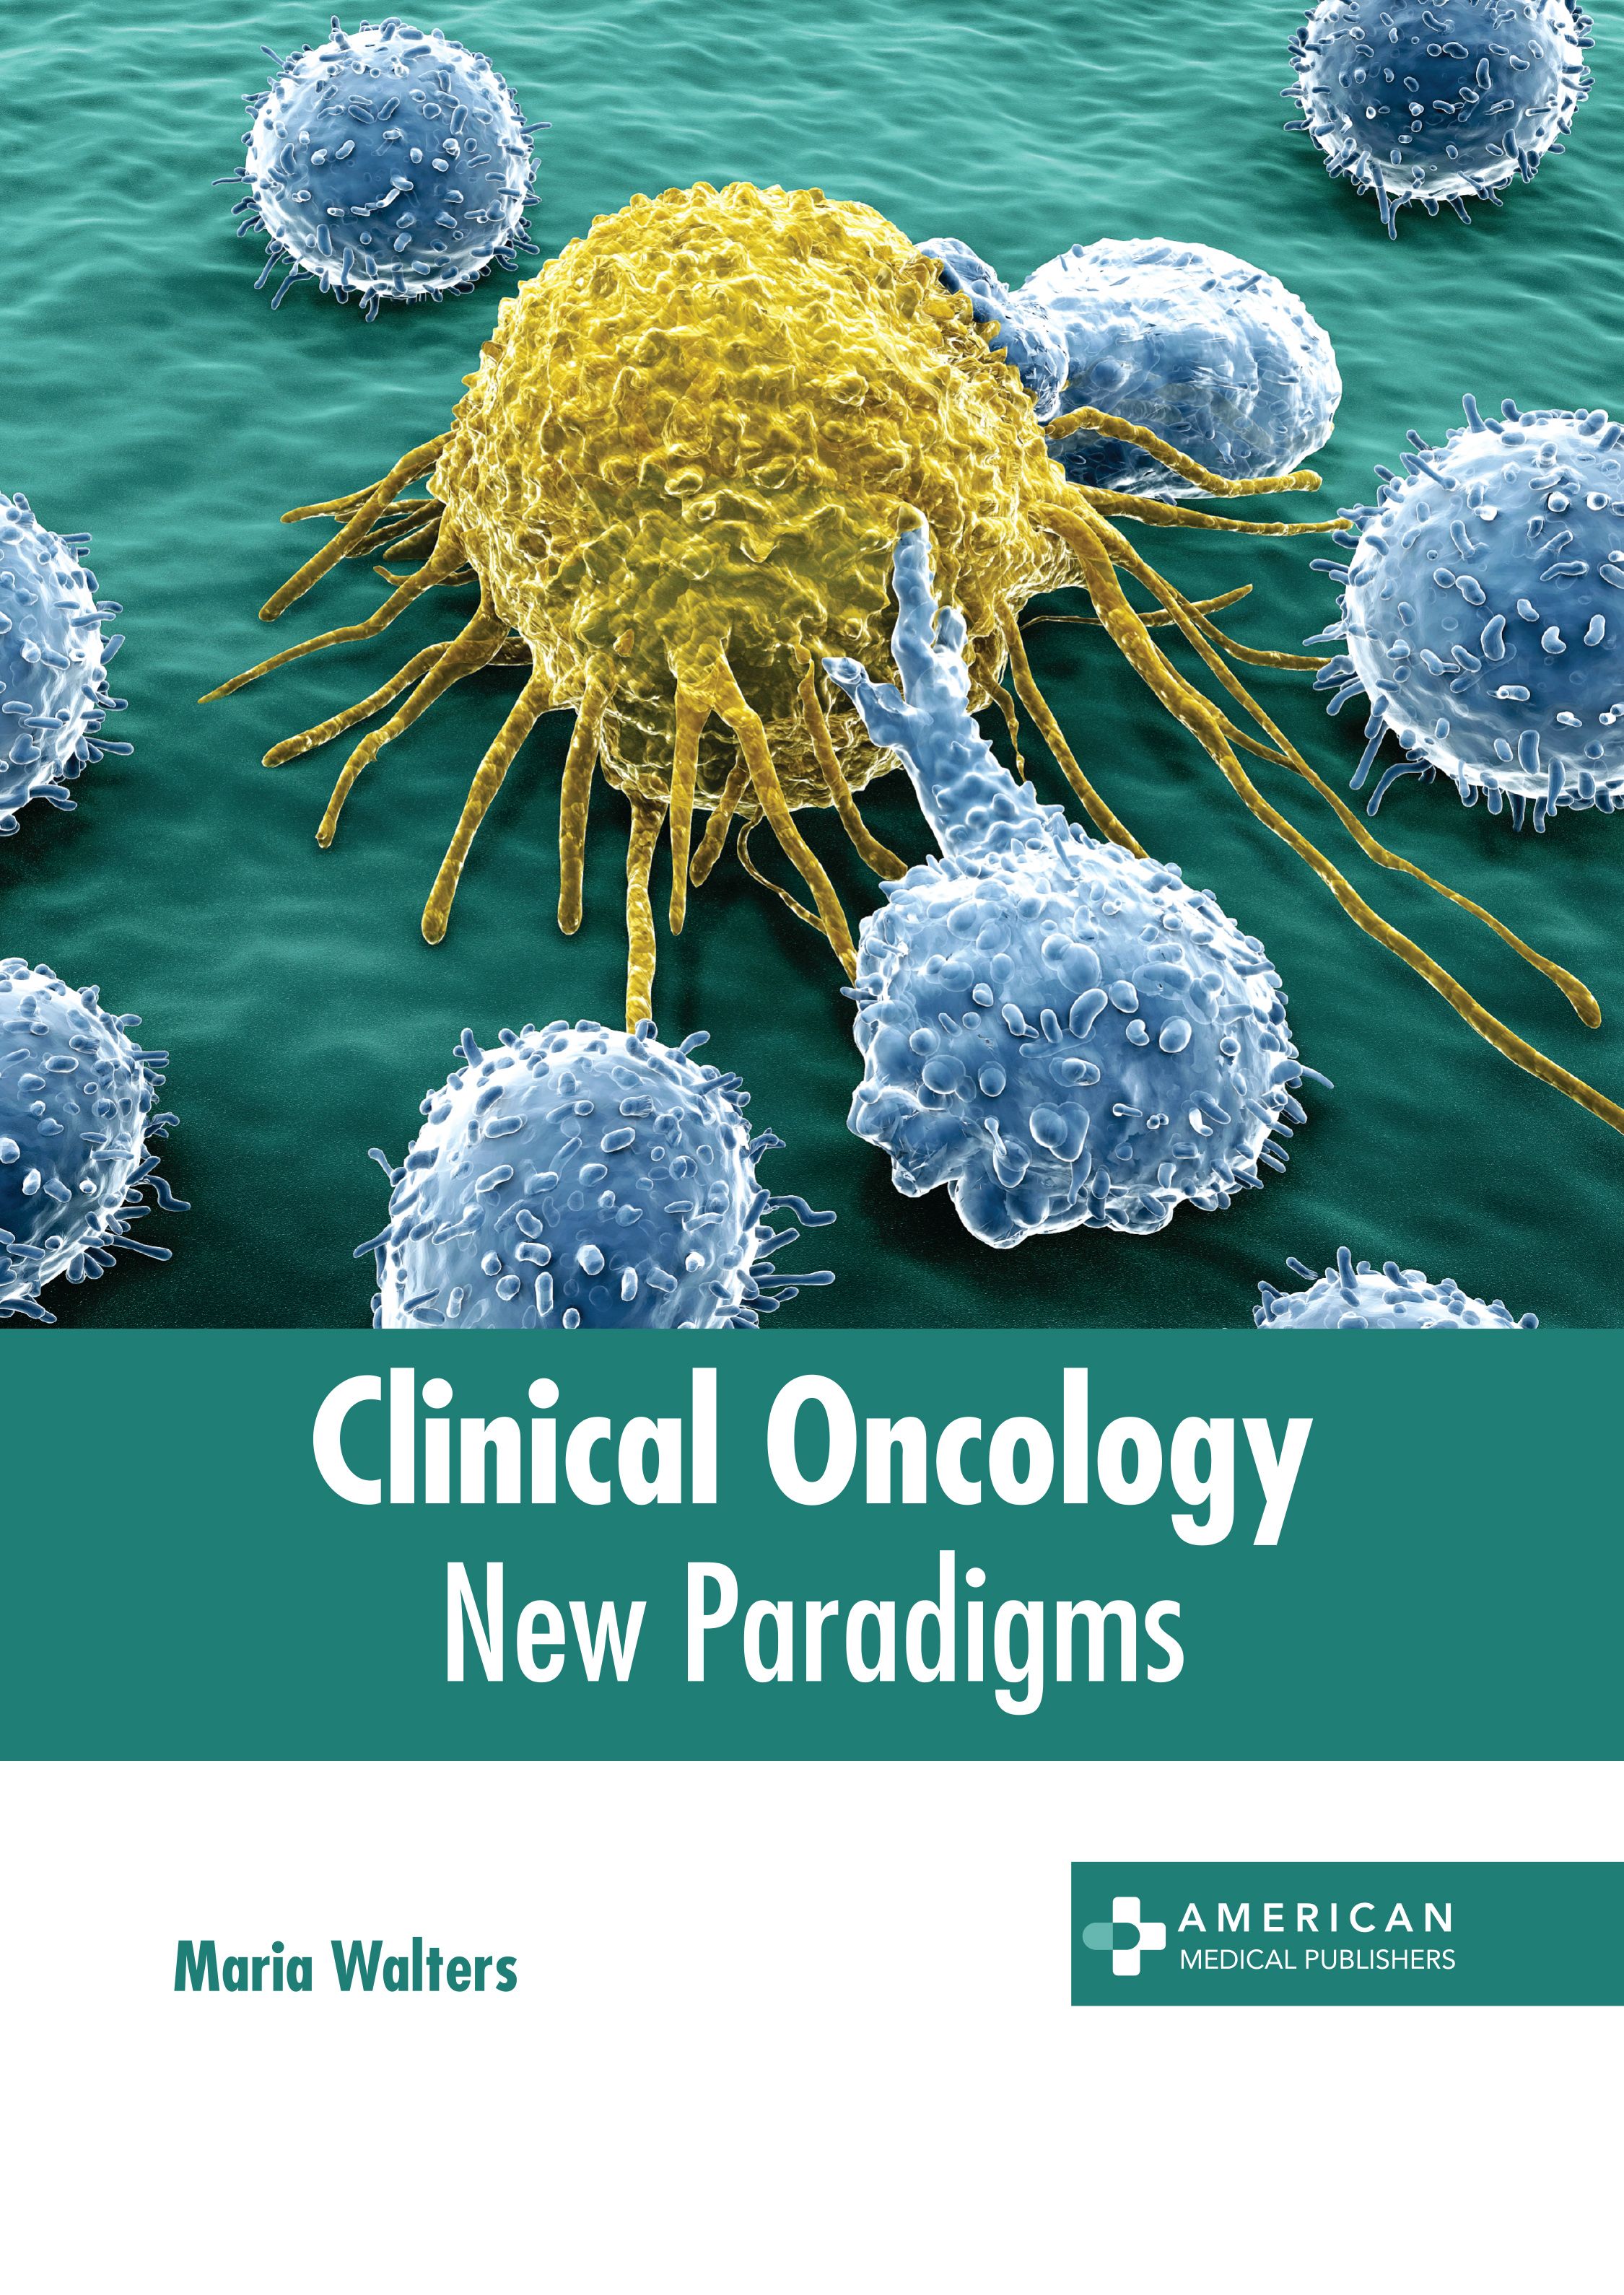 CLINICAL ONCOLOGY: NEW PARADIGMS